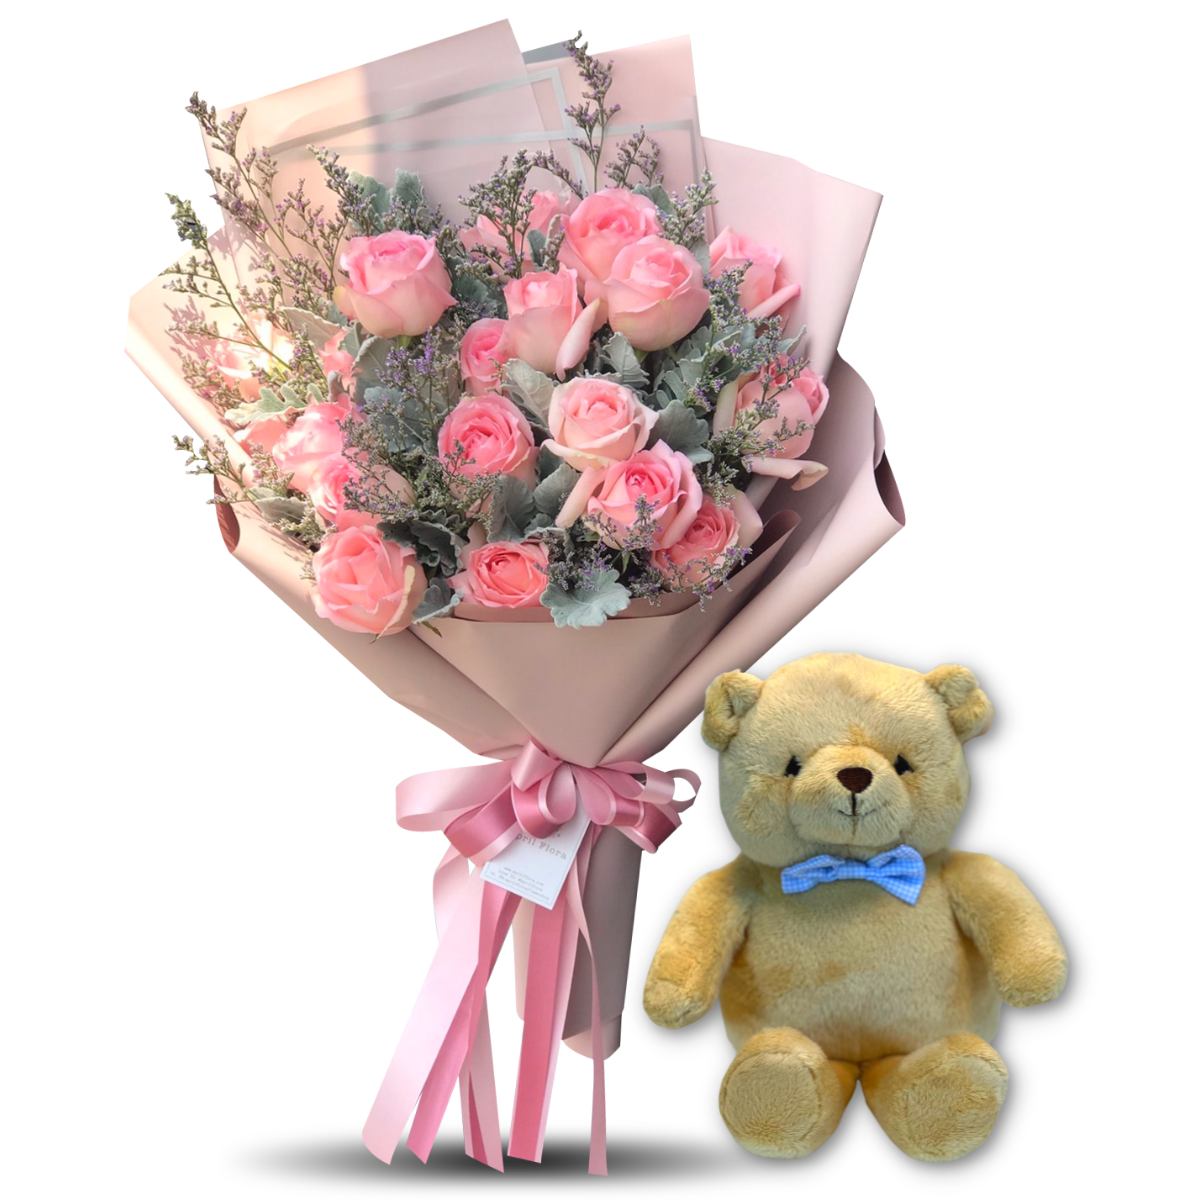 Bouquet Of 20 Pink Roses With Caspia and Teddy Bear with Bow Tie